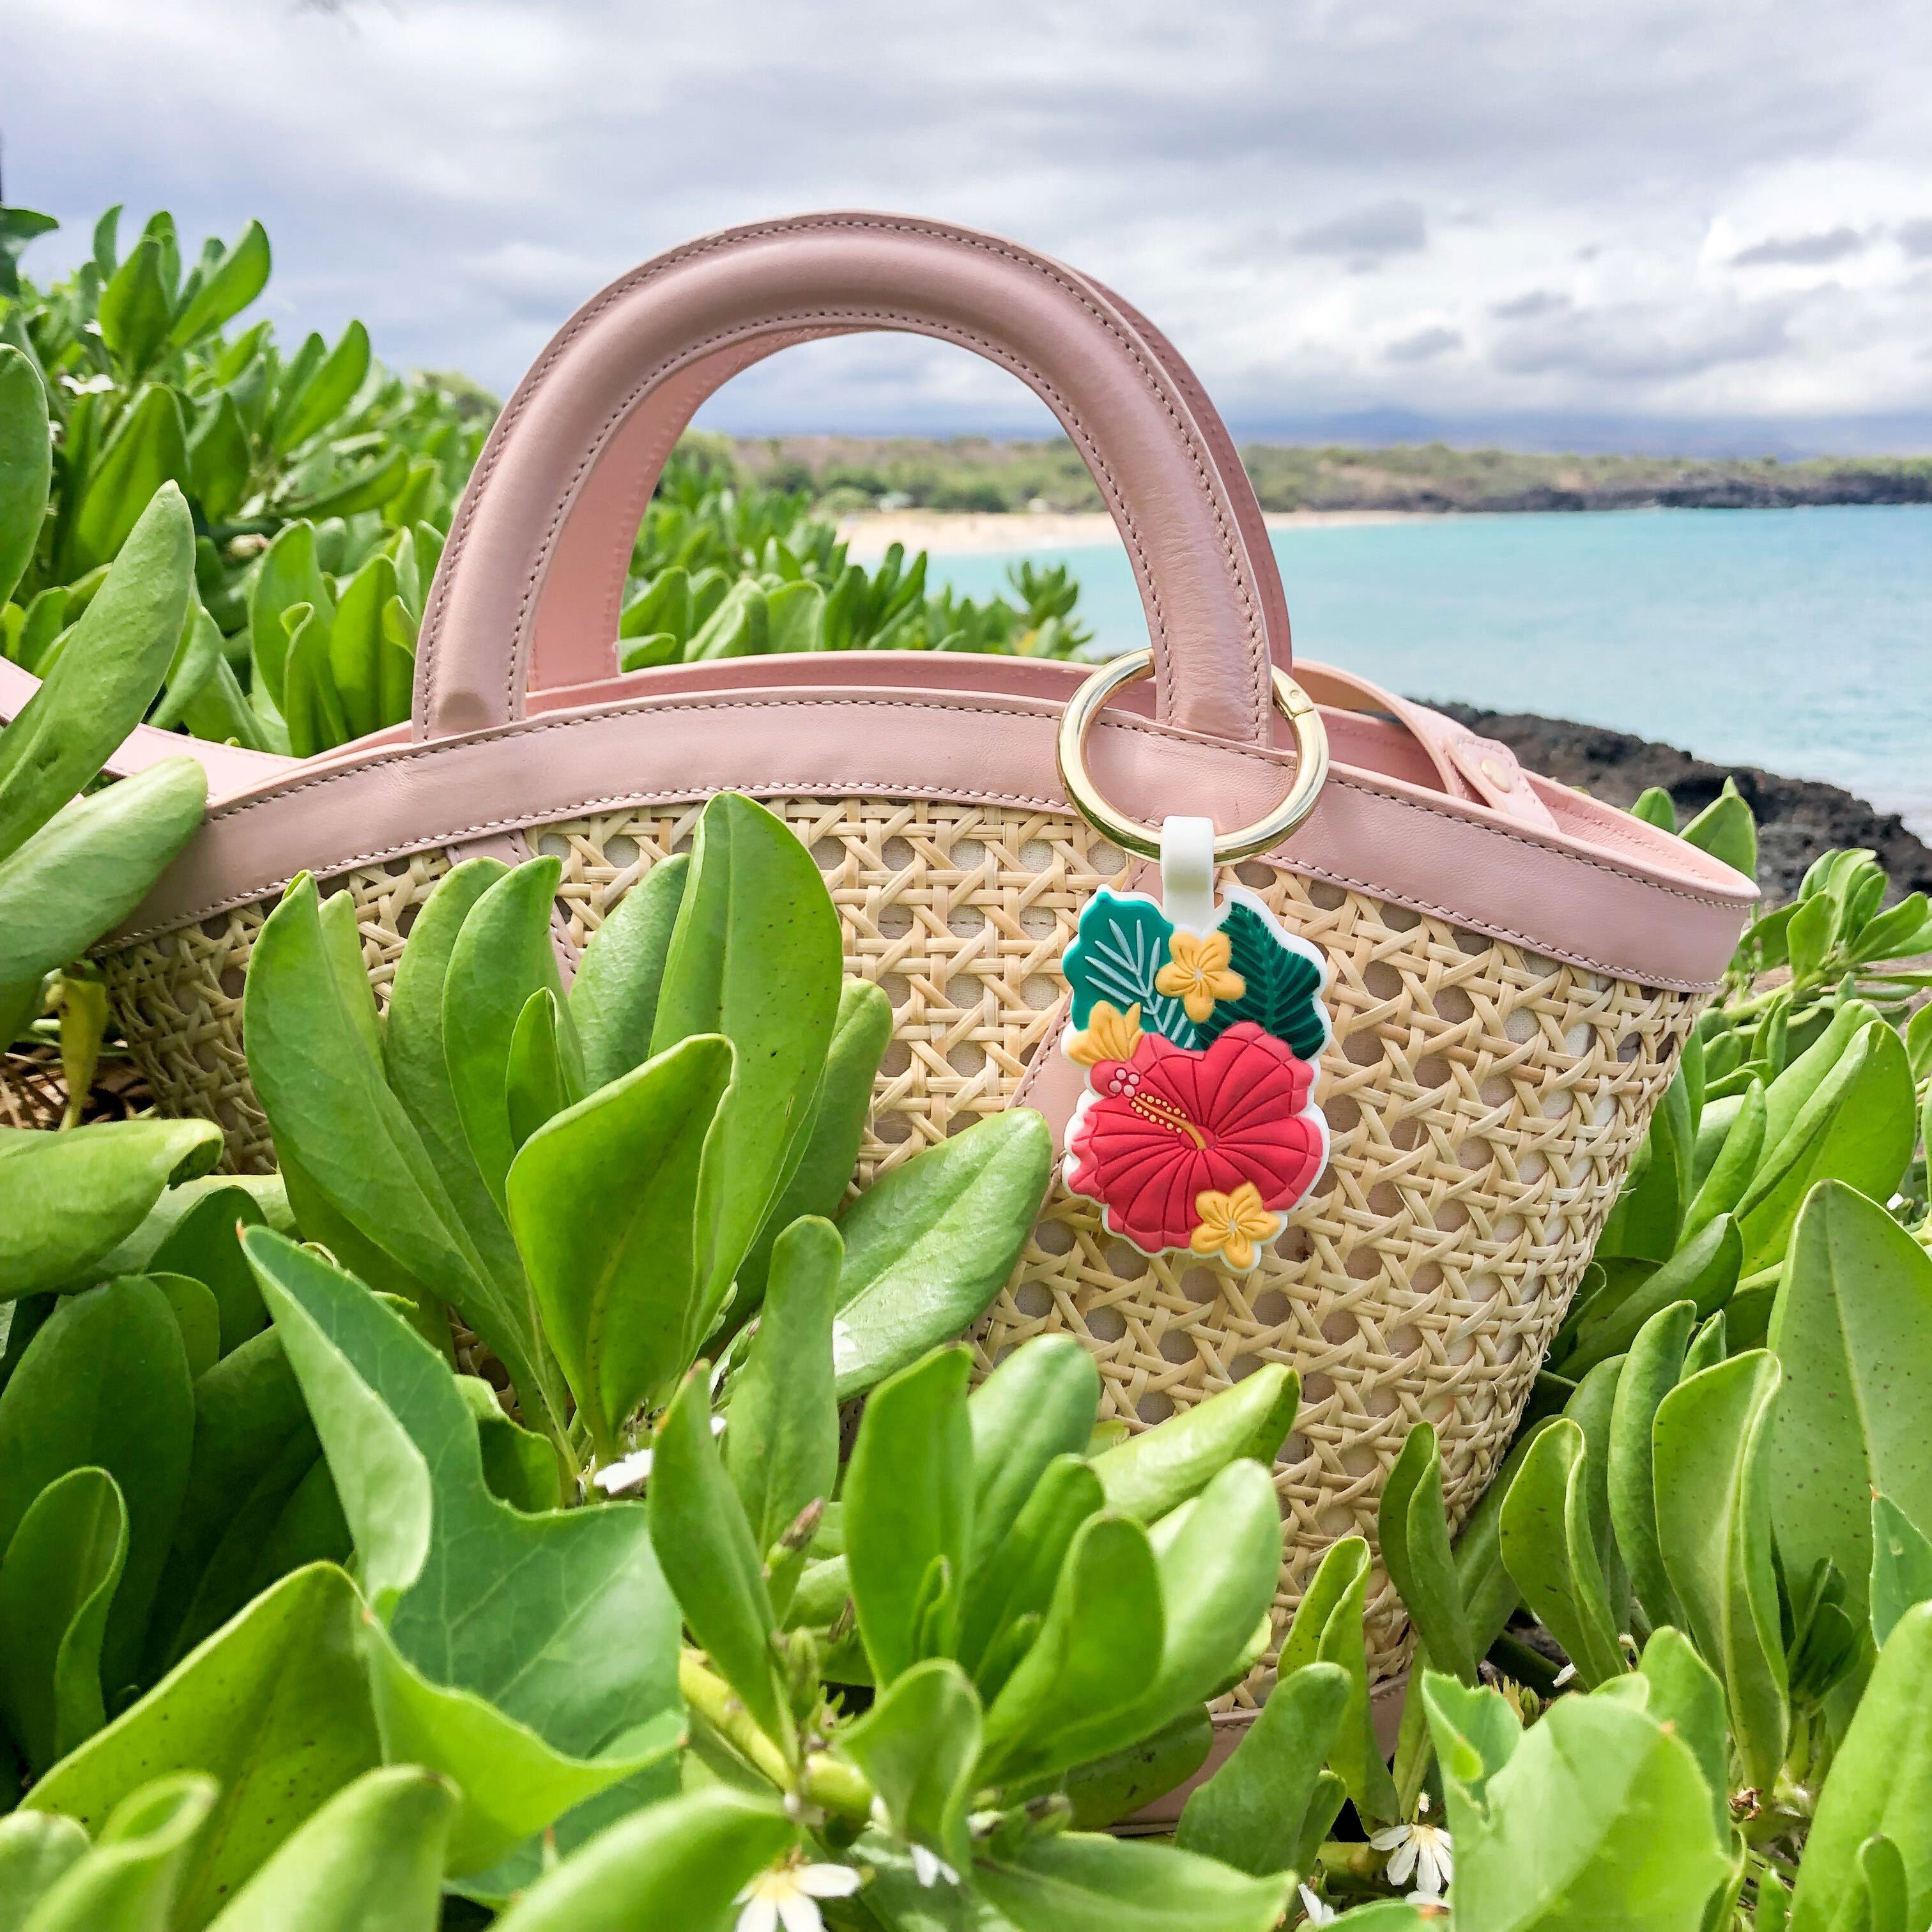 Maui, the limited-edition Bagnet magnetic purse holder, clipped to a rattan and leather basket bag, nesting in foliage with the blue Hawaiian coastline in the distance 